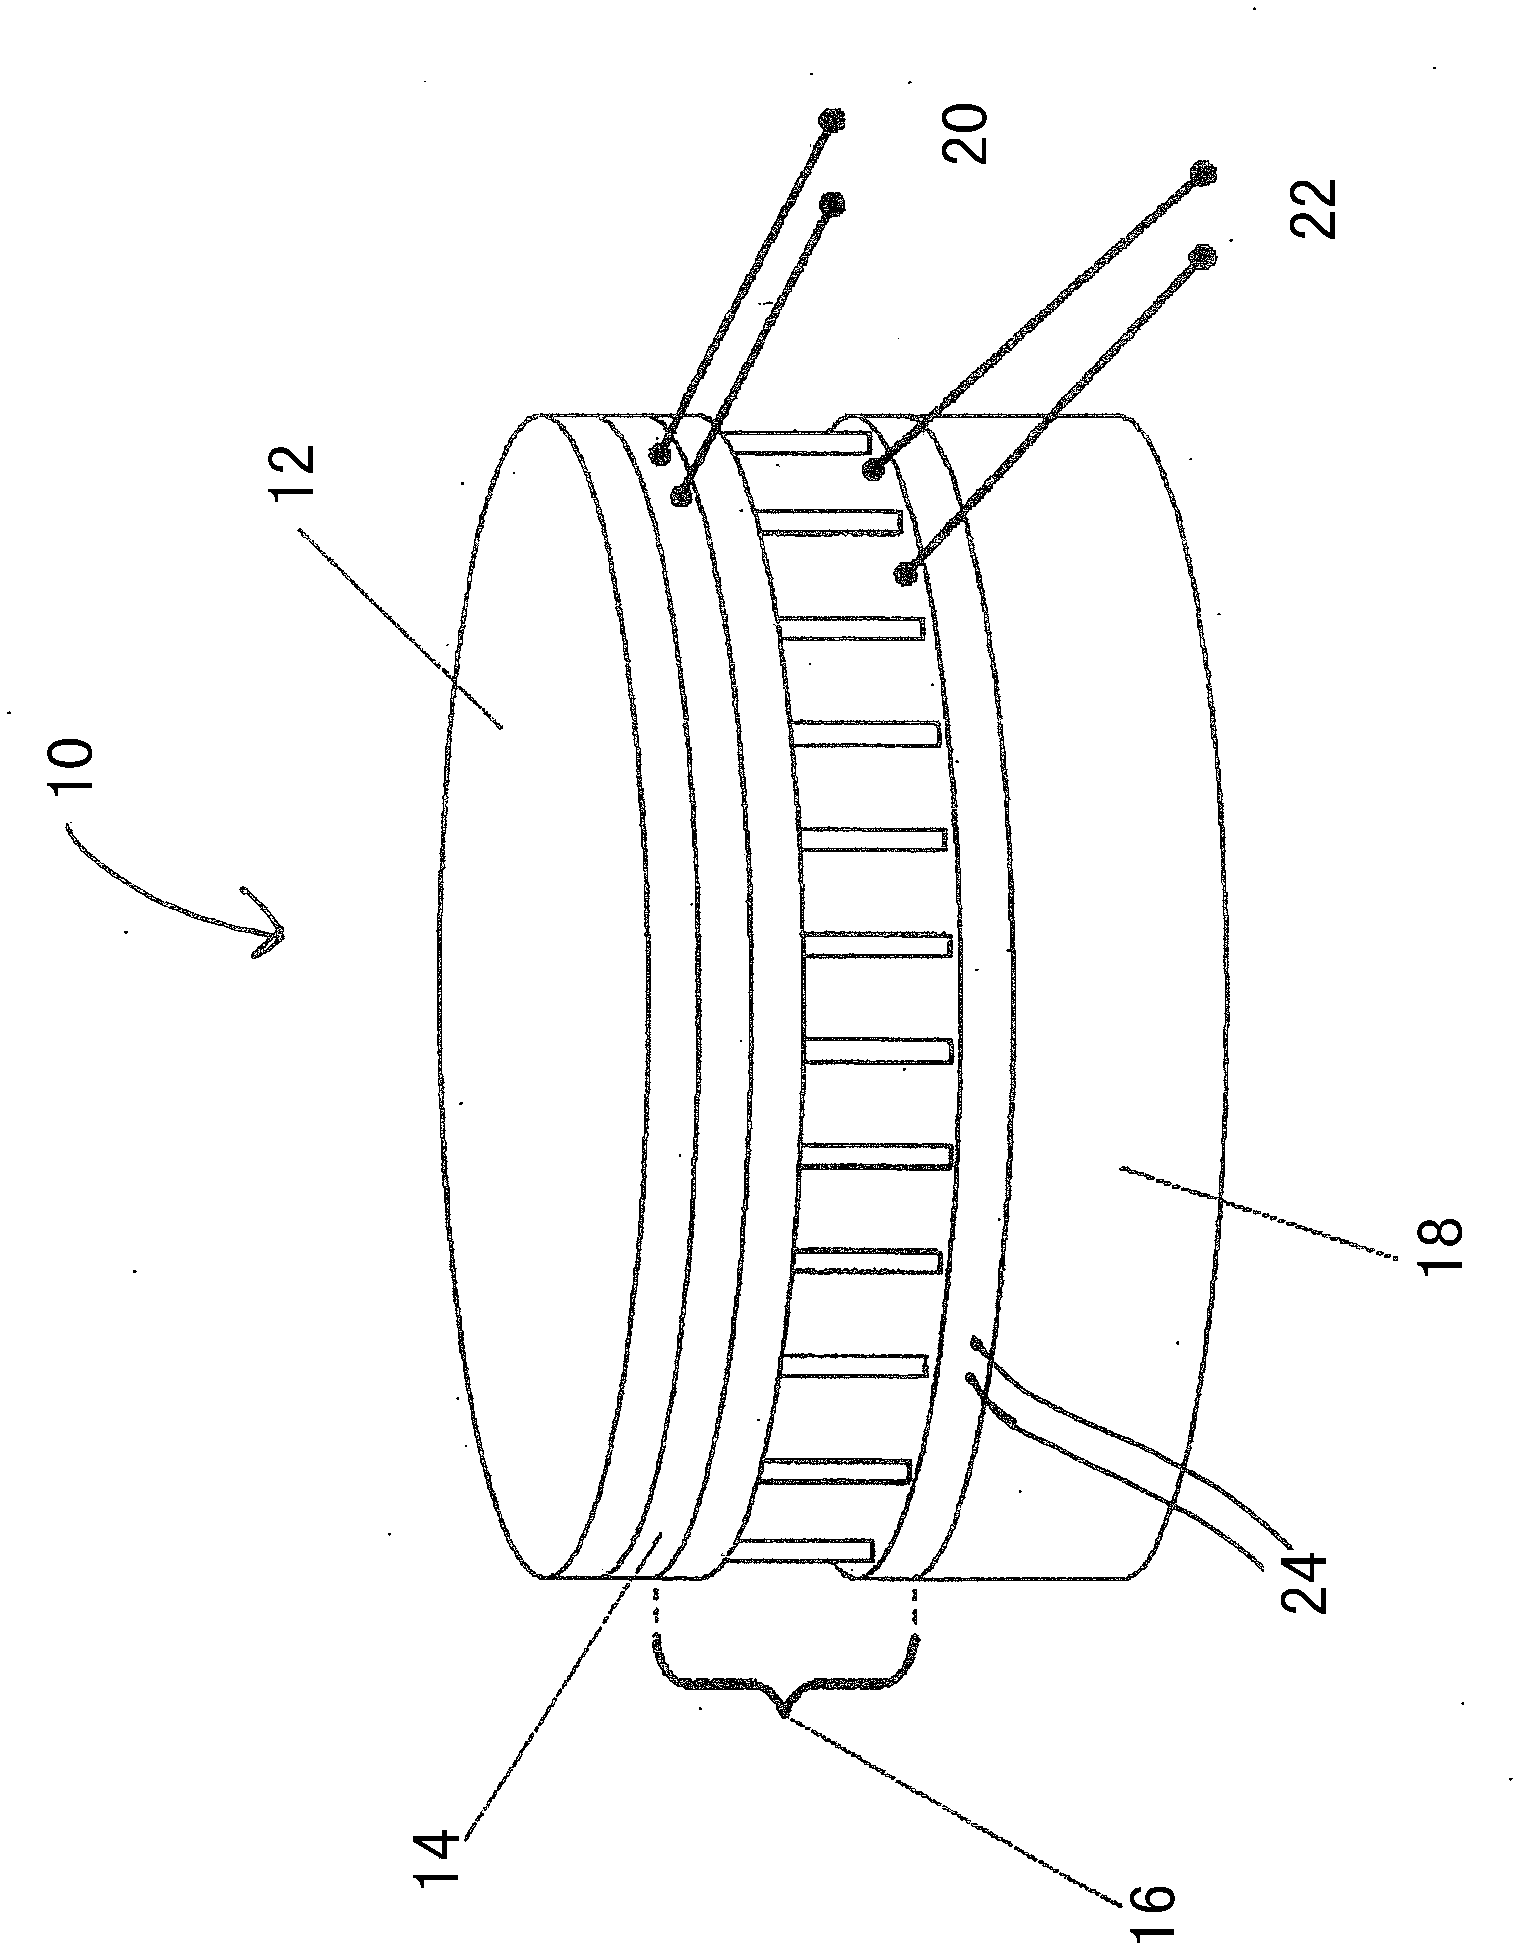 Icing sensor system and method